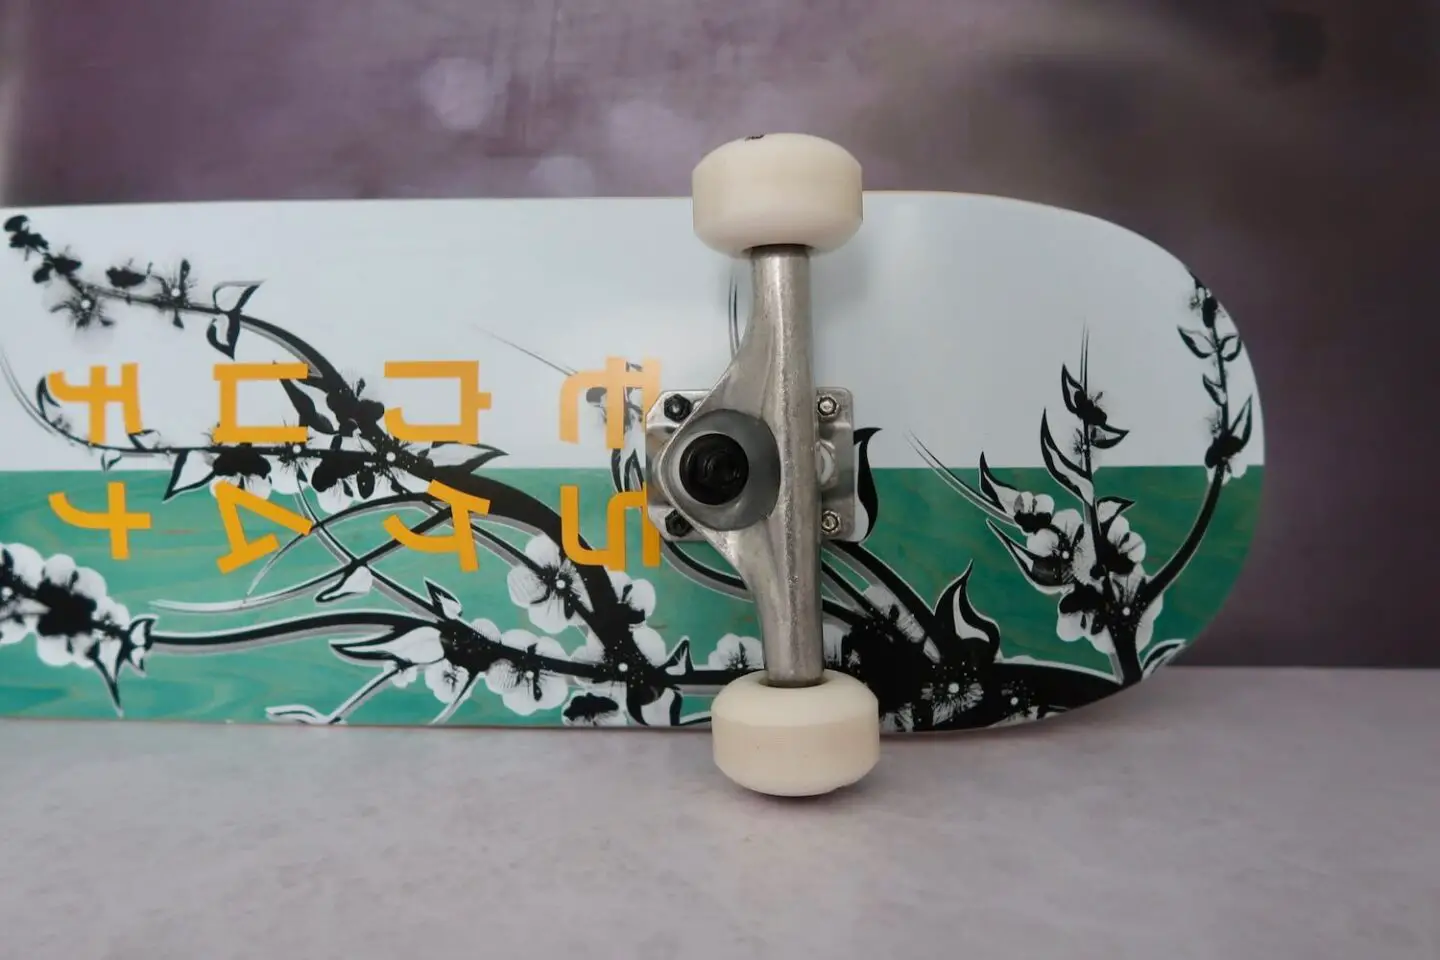 The base of a skateboard lying on it's side. It is half white and half green with a cherry blossom design